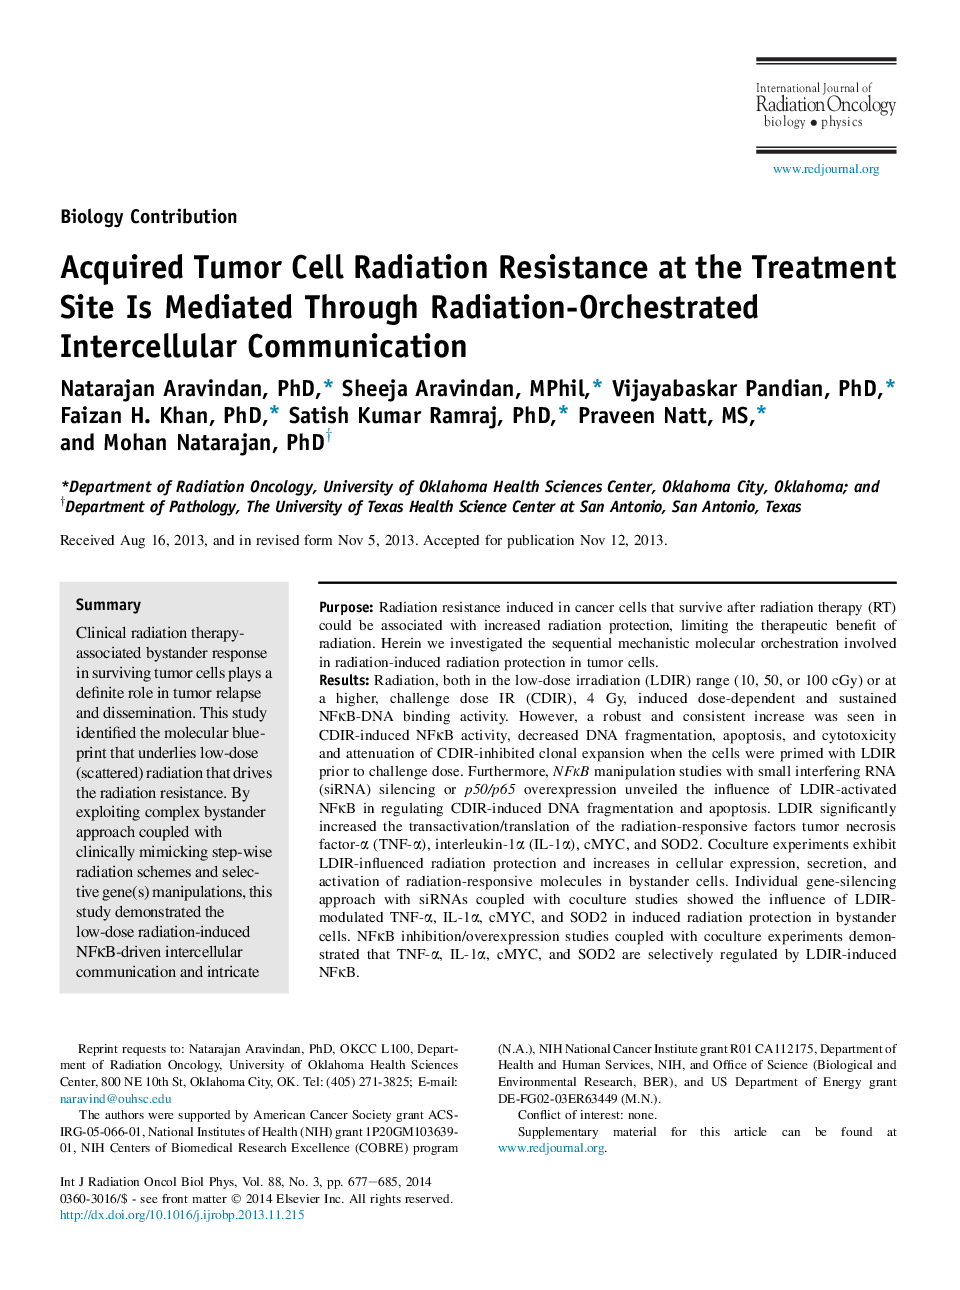 Acquired Tumor Cell Radiation Resistance at the Treatment Site Is Mediated Through Radiation-Orchestrated Intercellular Communication